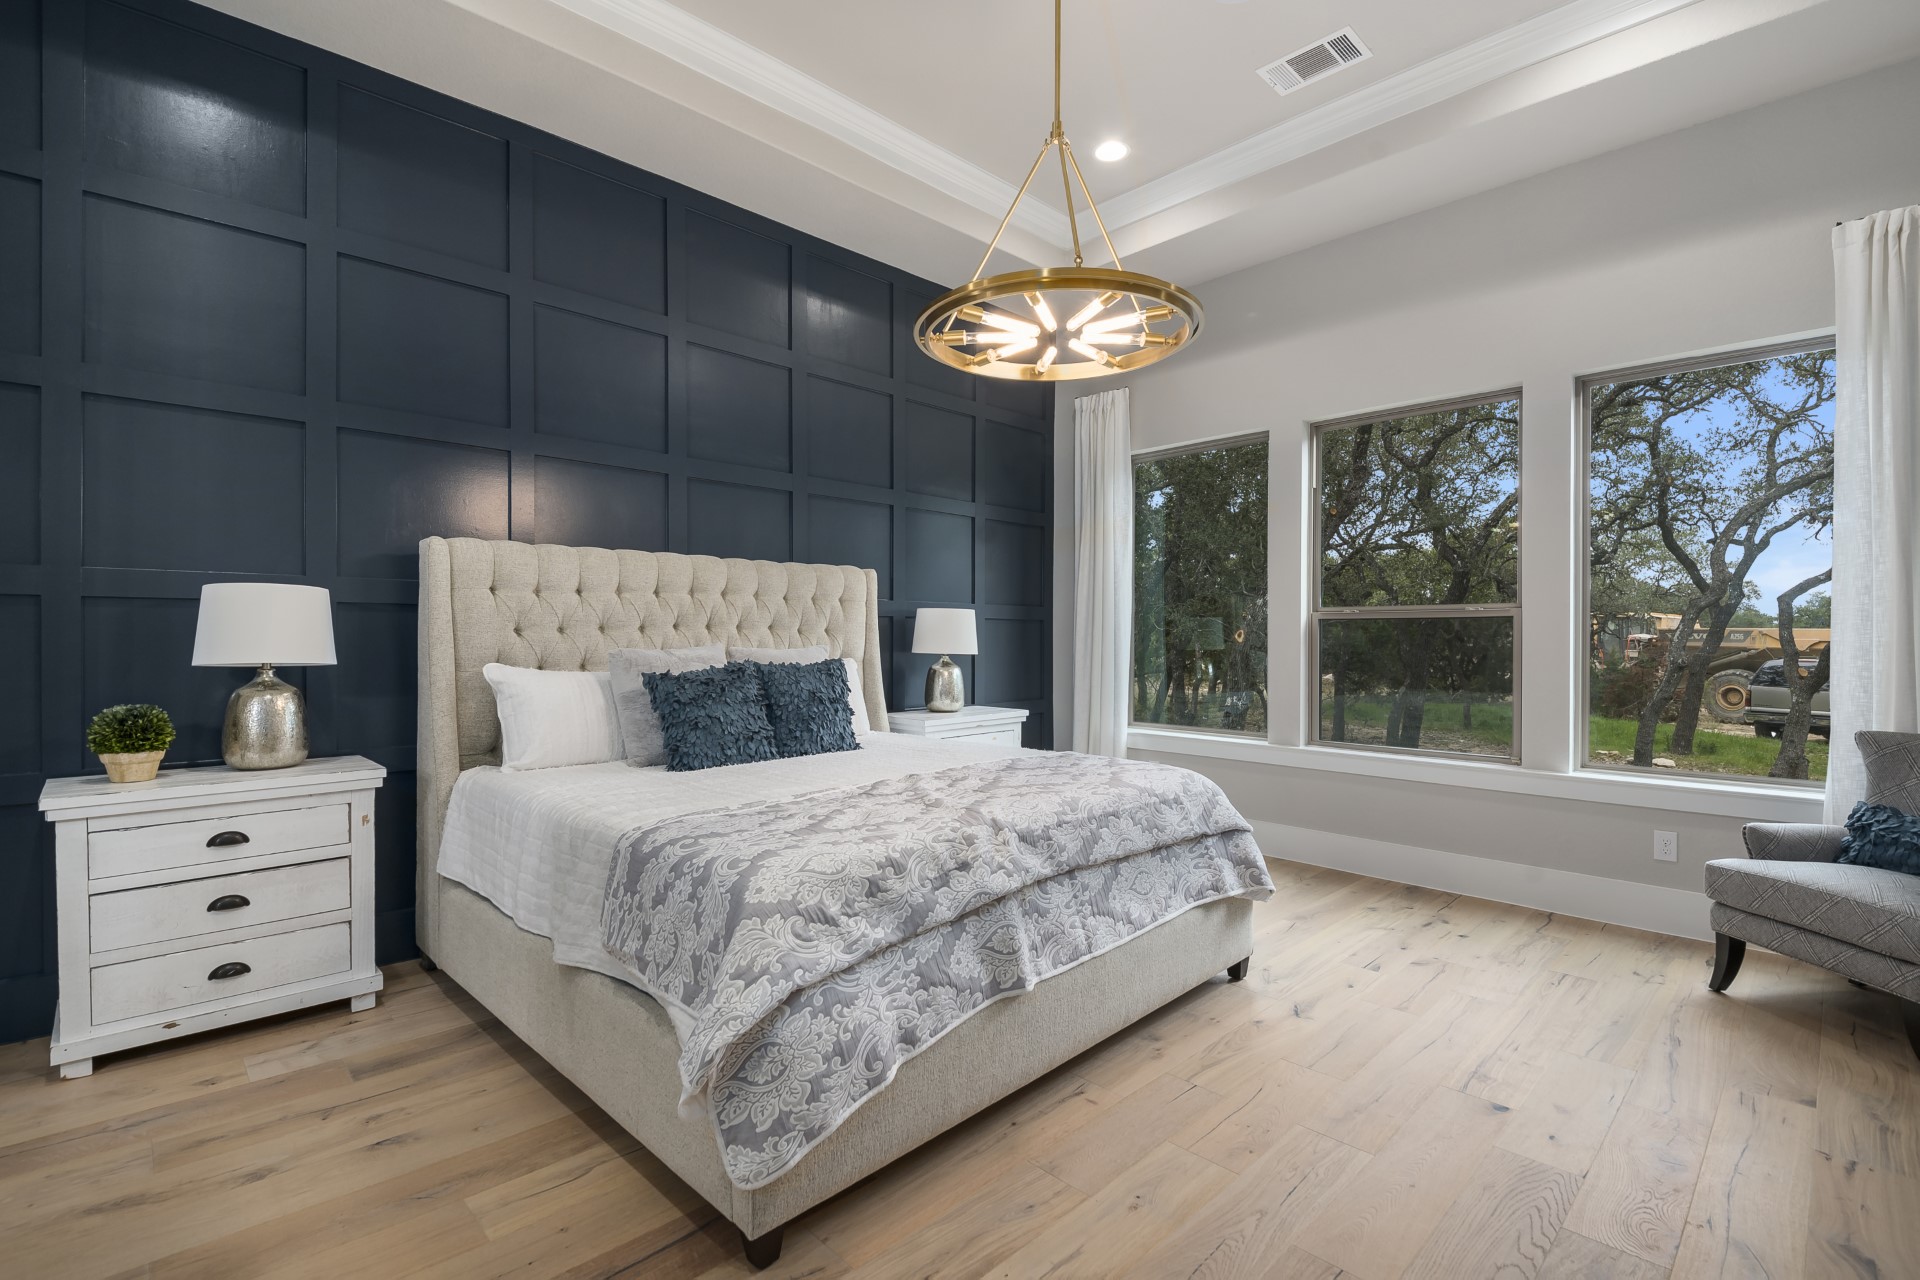 A front view of the master bedroom within the Belle Oaks custom floor plan from JLP Builders